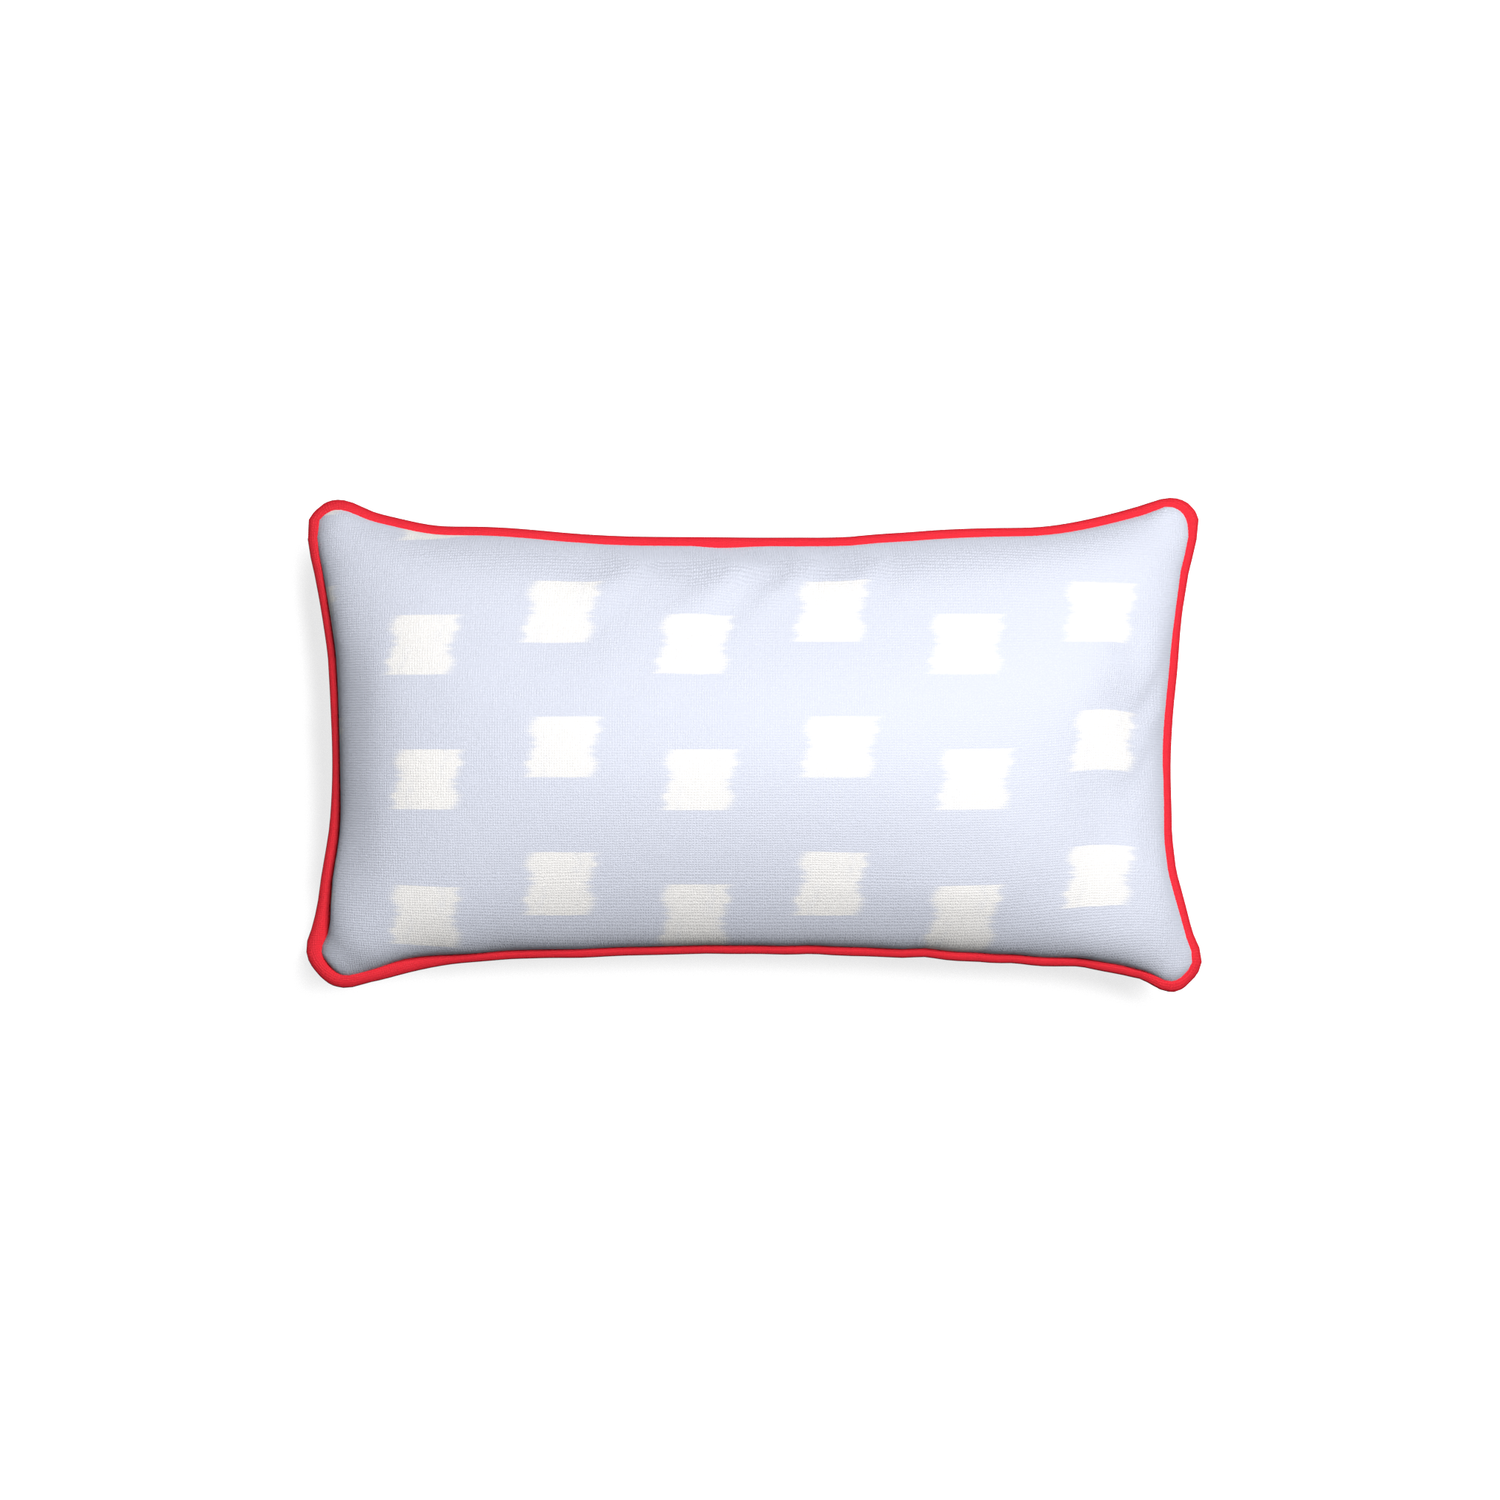 Petite-lumbar denton custom sky blue patternpillow with cherry piping on white background